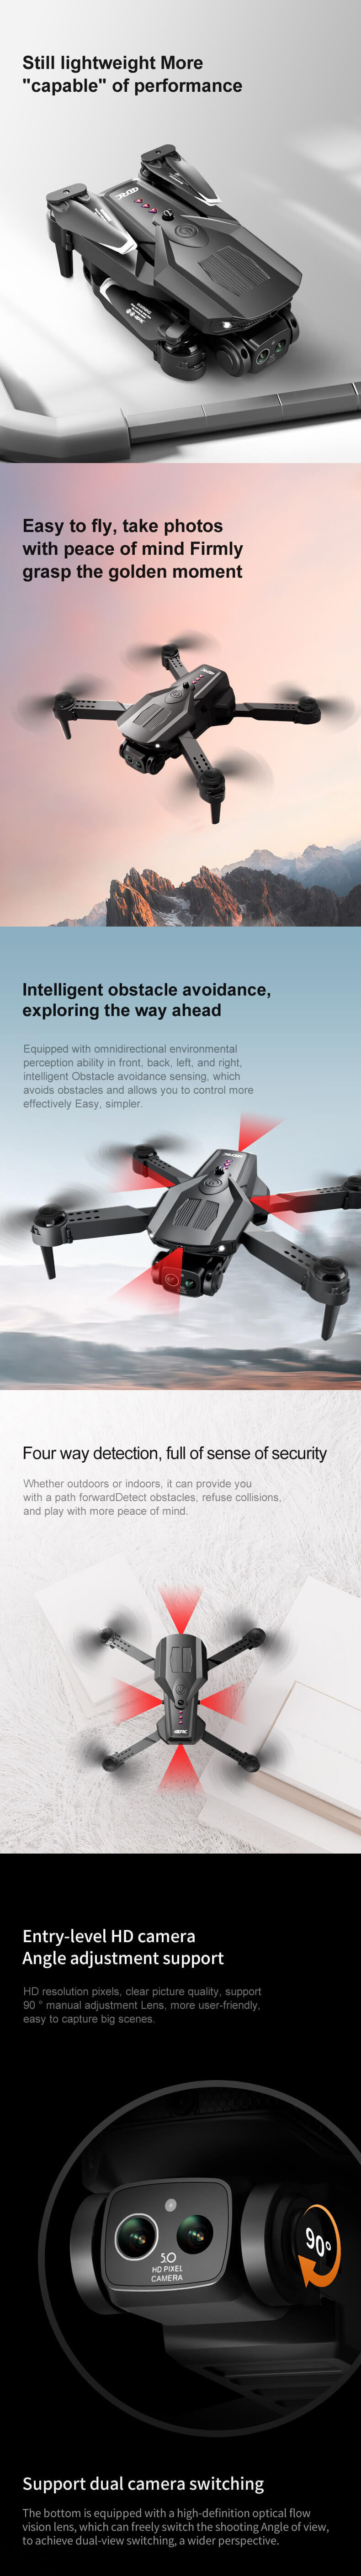 4DRC V32 Obstacle Avoidance Beginner Drone Wifi HD camera with 2 batteries, remote control toy Christmas gift